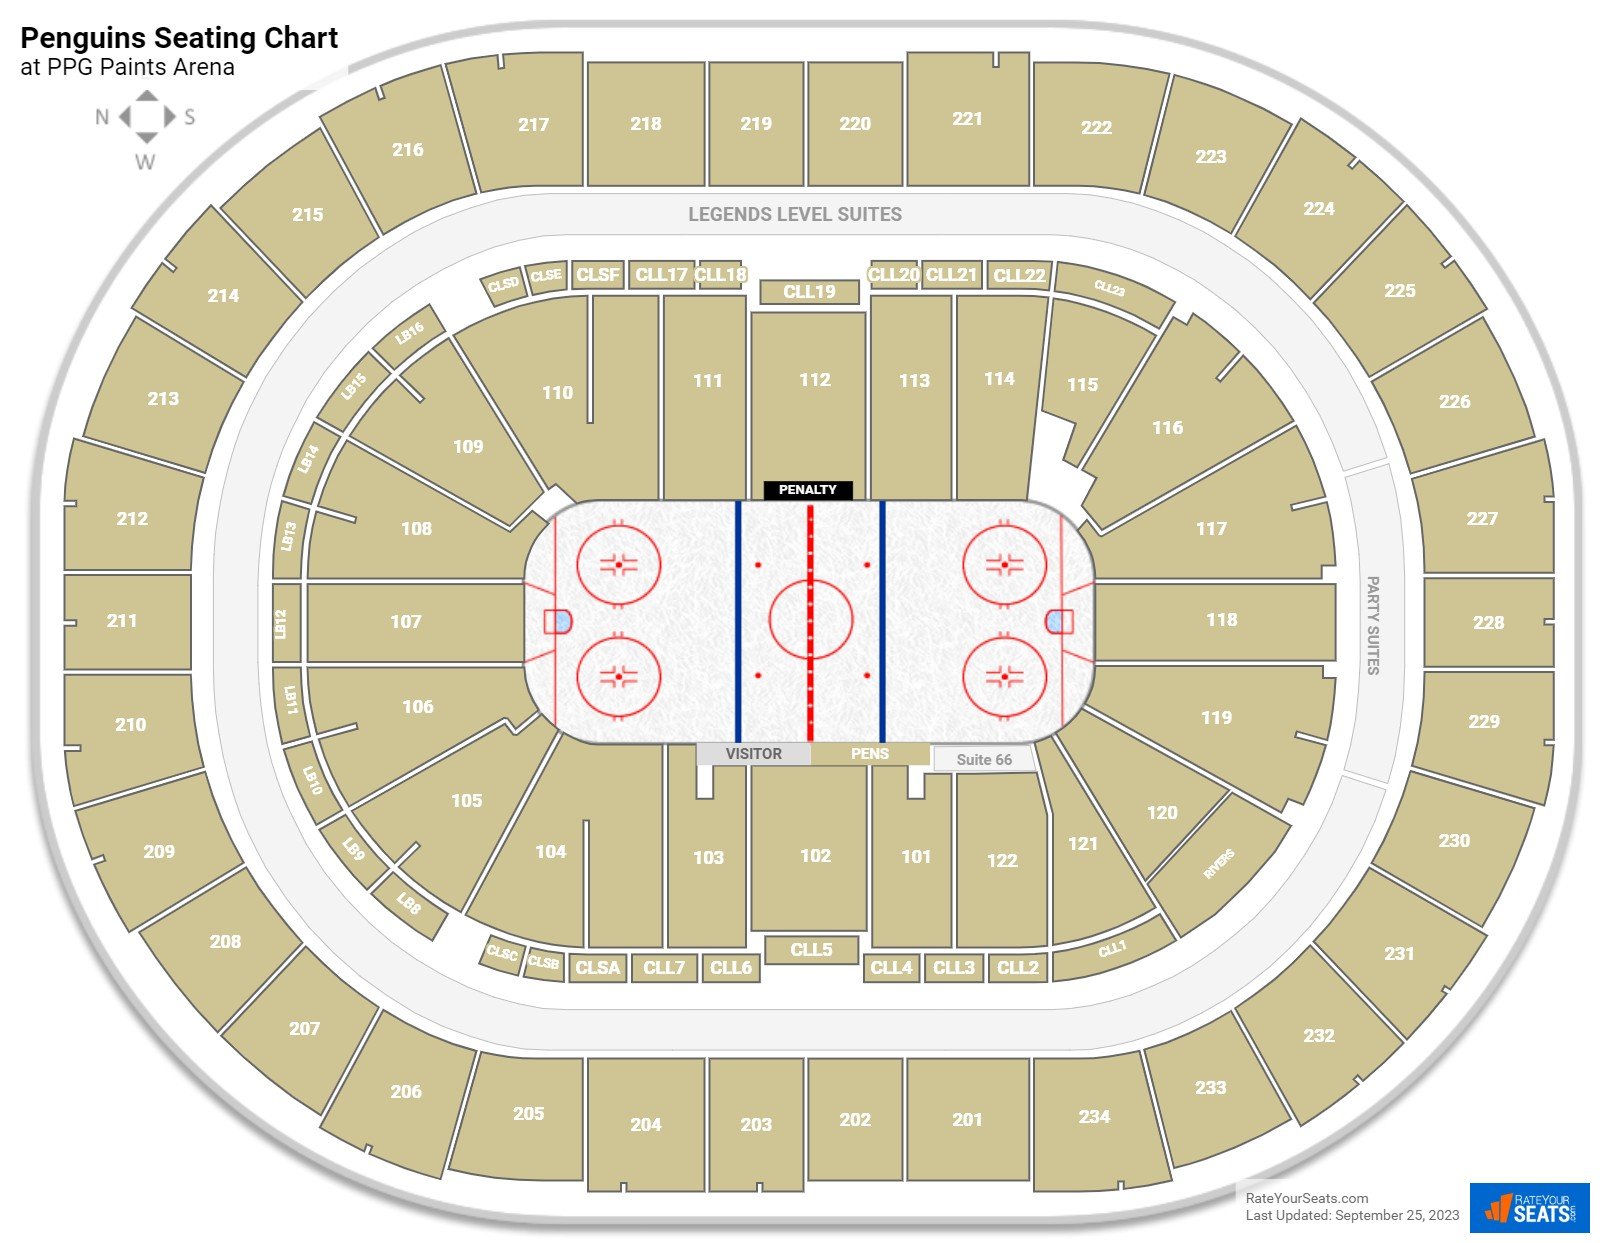 Pittsburgh Penguins Seating Chart at PPG Paints Arena